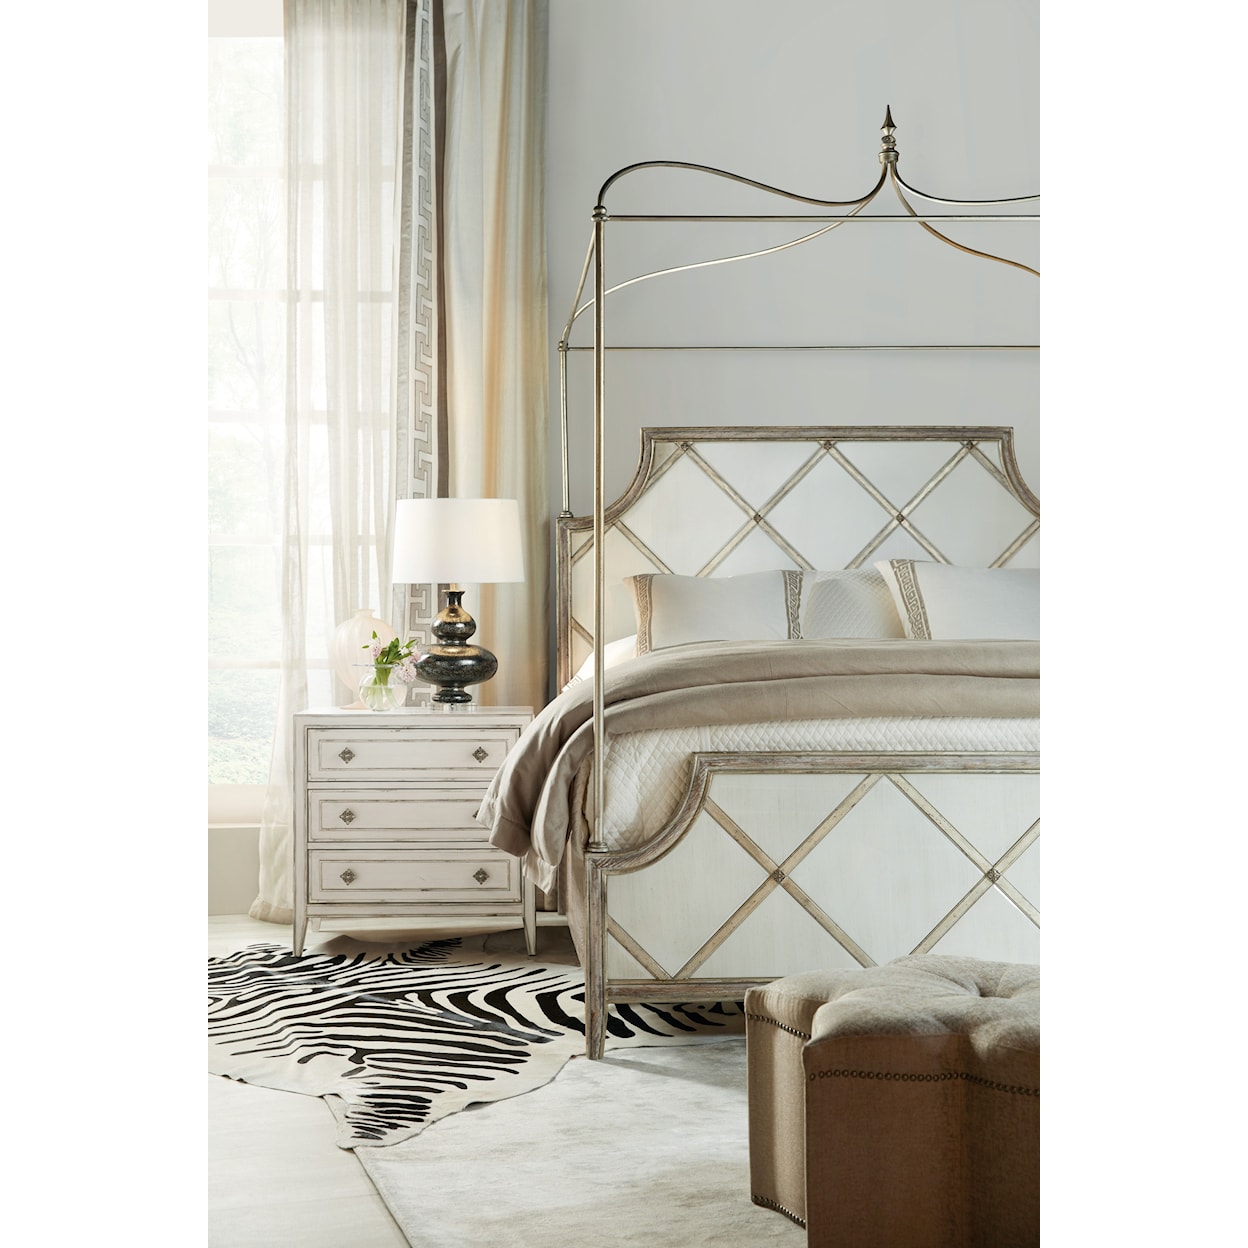 Hooker Furniture Sanctuary King Canopy Bed